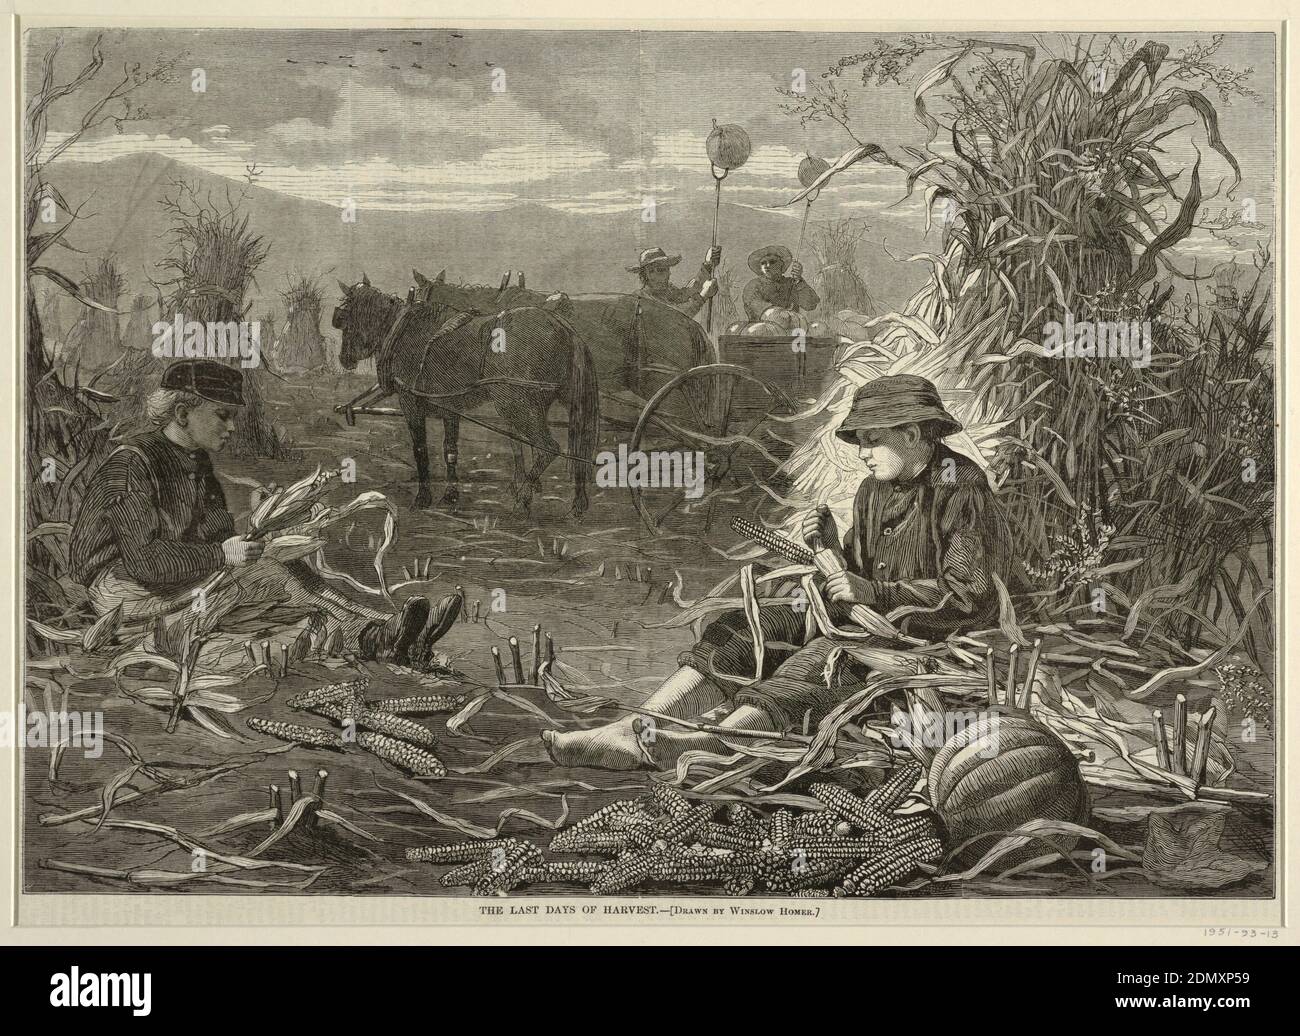 The Last Days of Harvest, from Harper's Weekly, December 6, 1873, p. 1092., Winslow Homer, American, 1836–1910, Wood engraving in black ink on newsprint paper, Horizontal scene showing, in the foreground, two small boys seated and husking corn with an open wagon filled with pumpkins in the background., USA, December 6, 1873, graphic design, Print Stock Photo